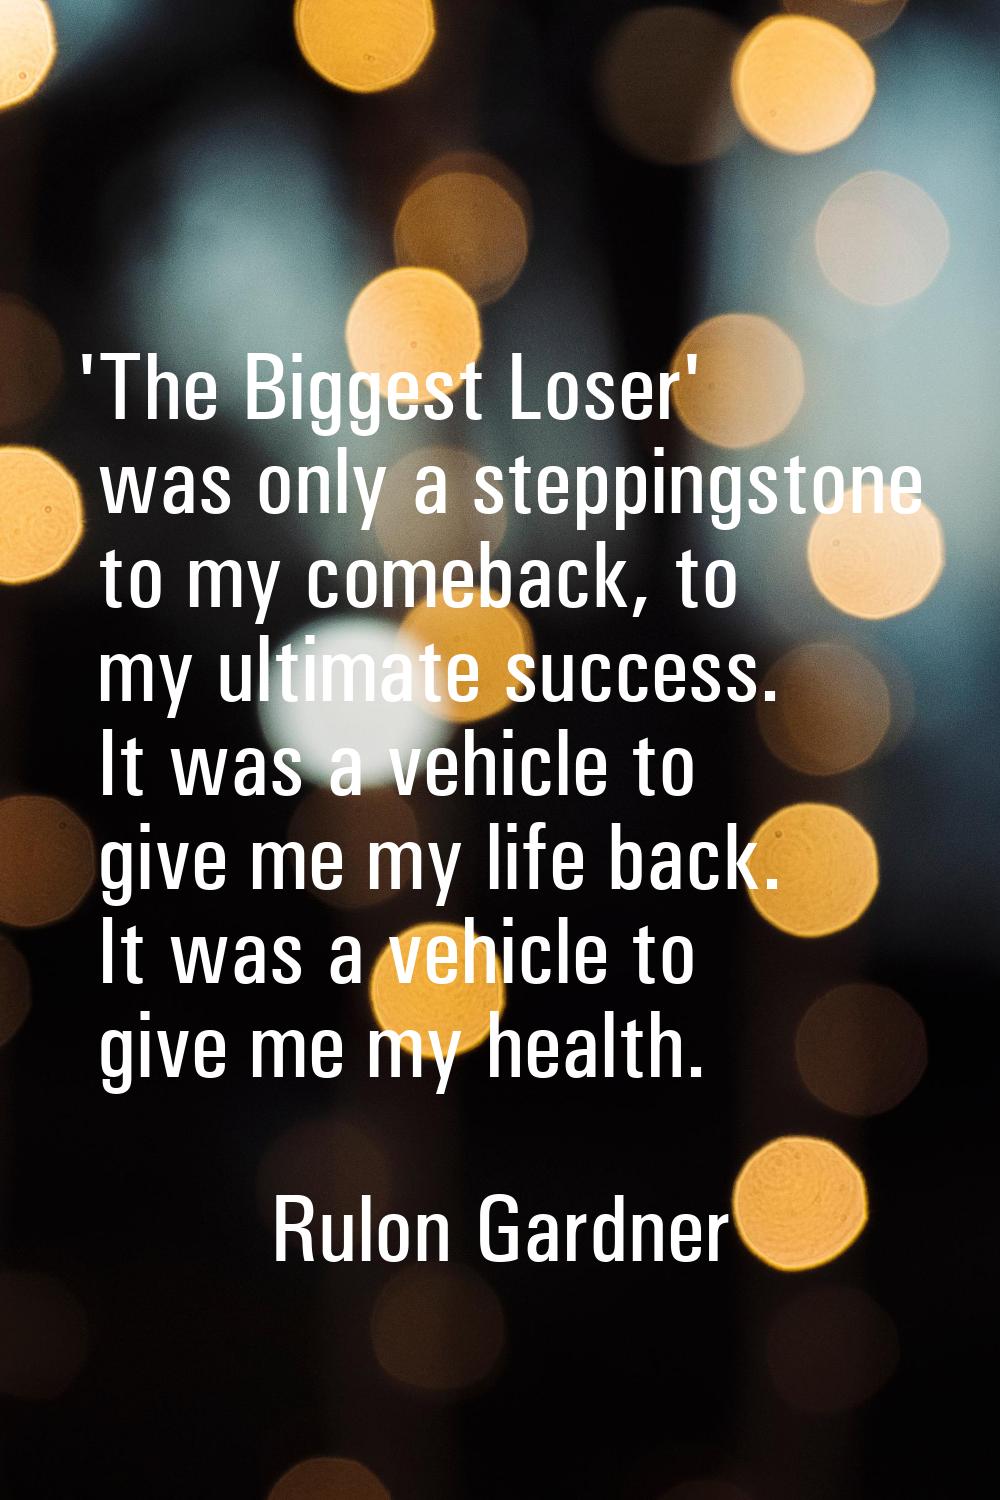 'The Biggest Loser' was only a steppingstone to my comeback, to my ultimate success. It was a vehic